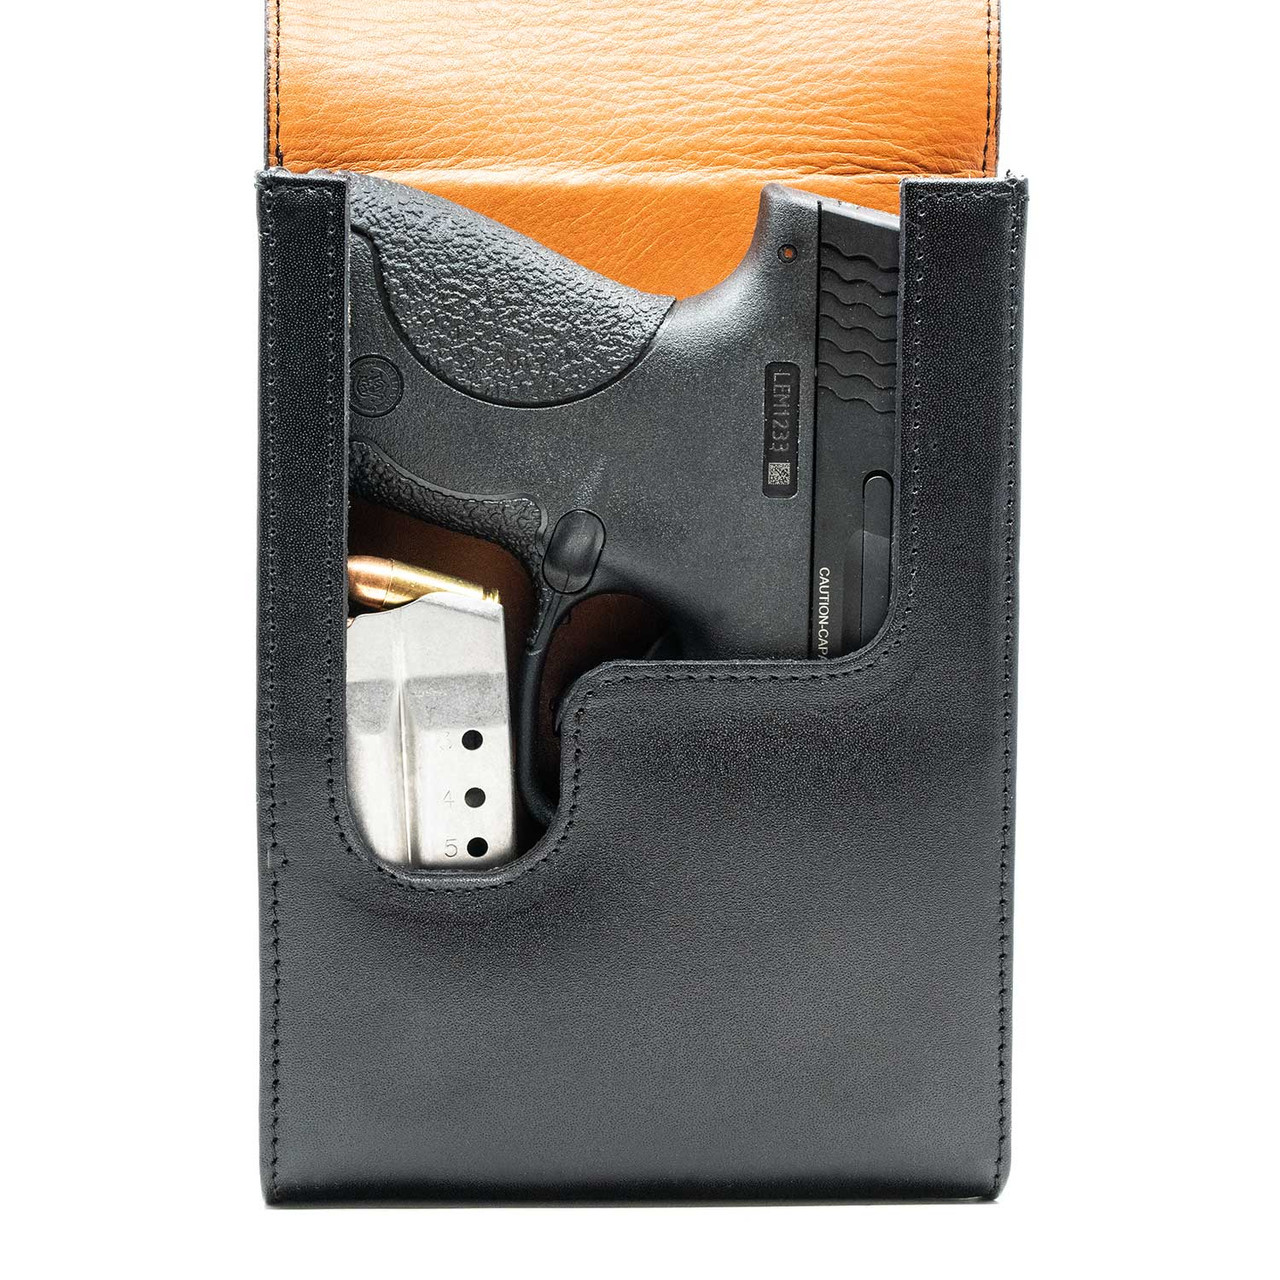 The Kahr PM45 Xtra Mag Black Leather Holster